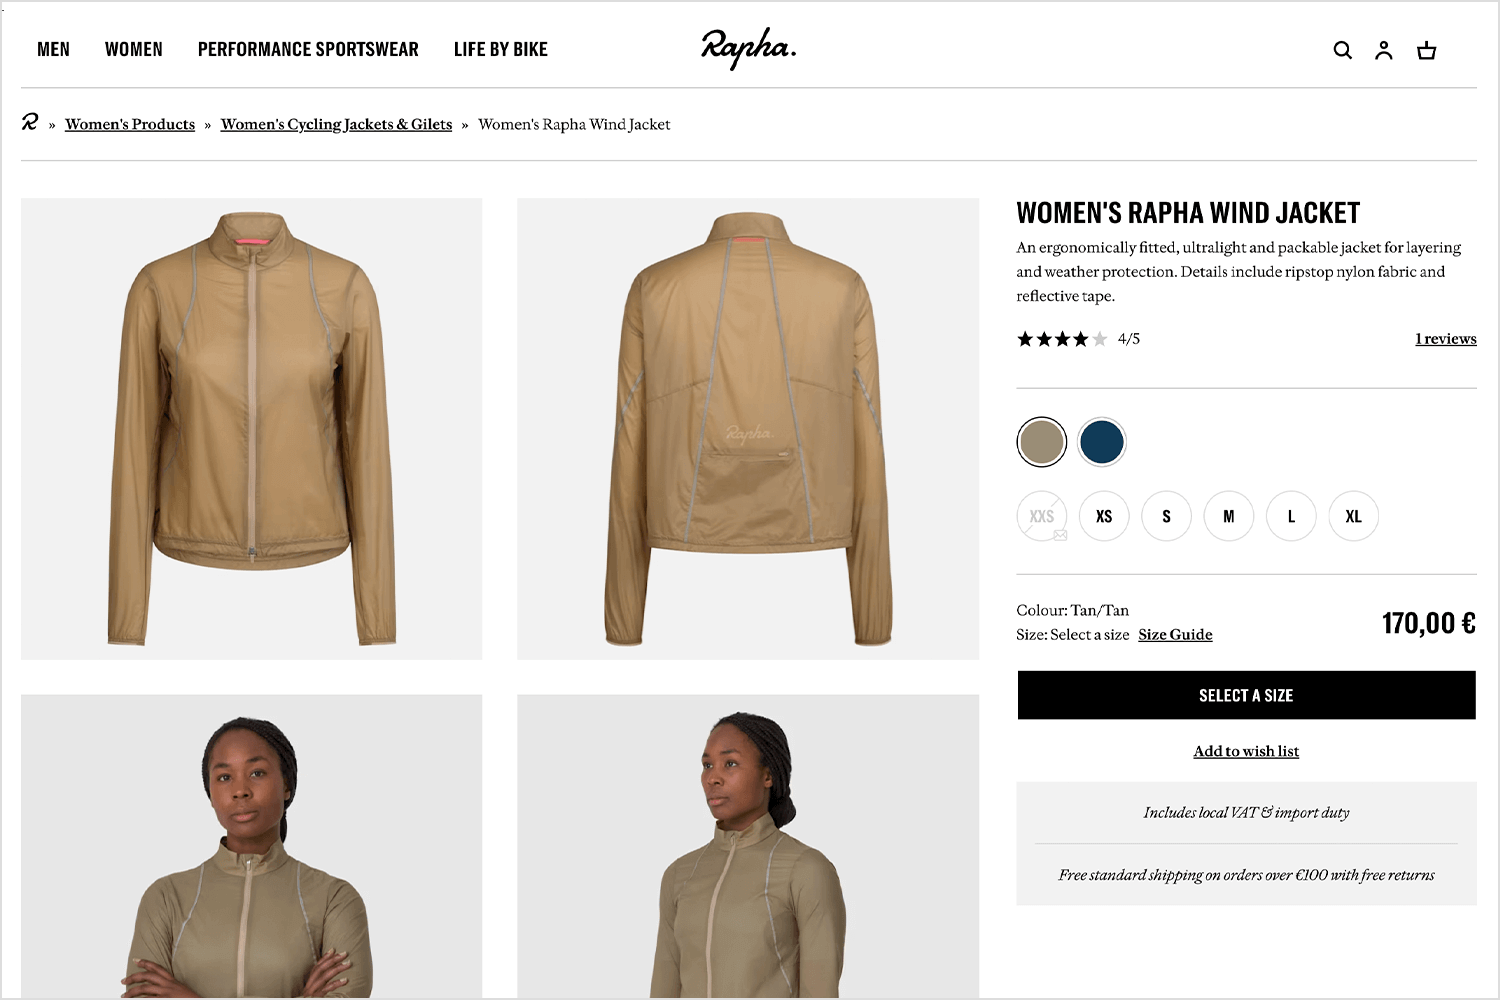 Rapha product page showing a women's wind jacket with images and details